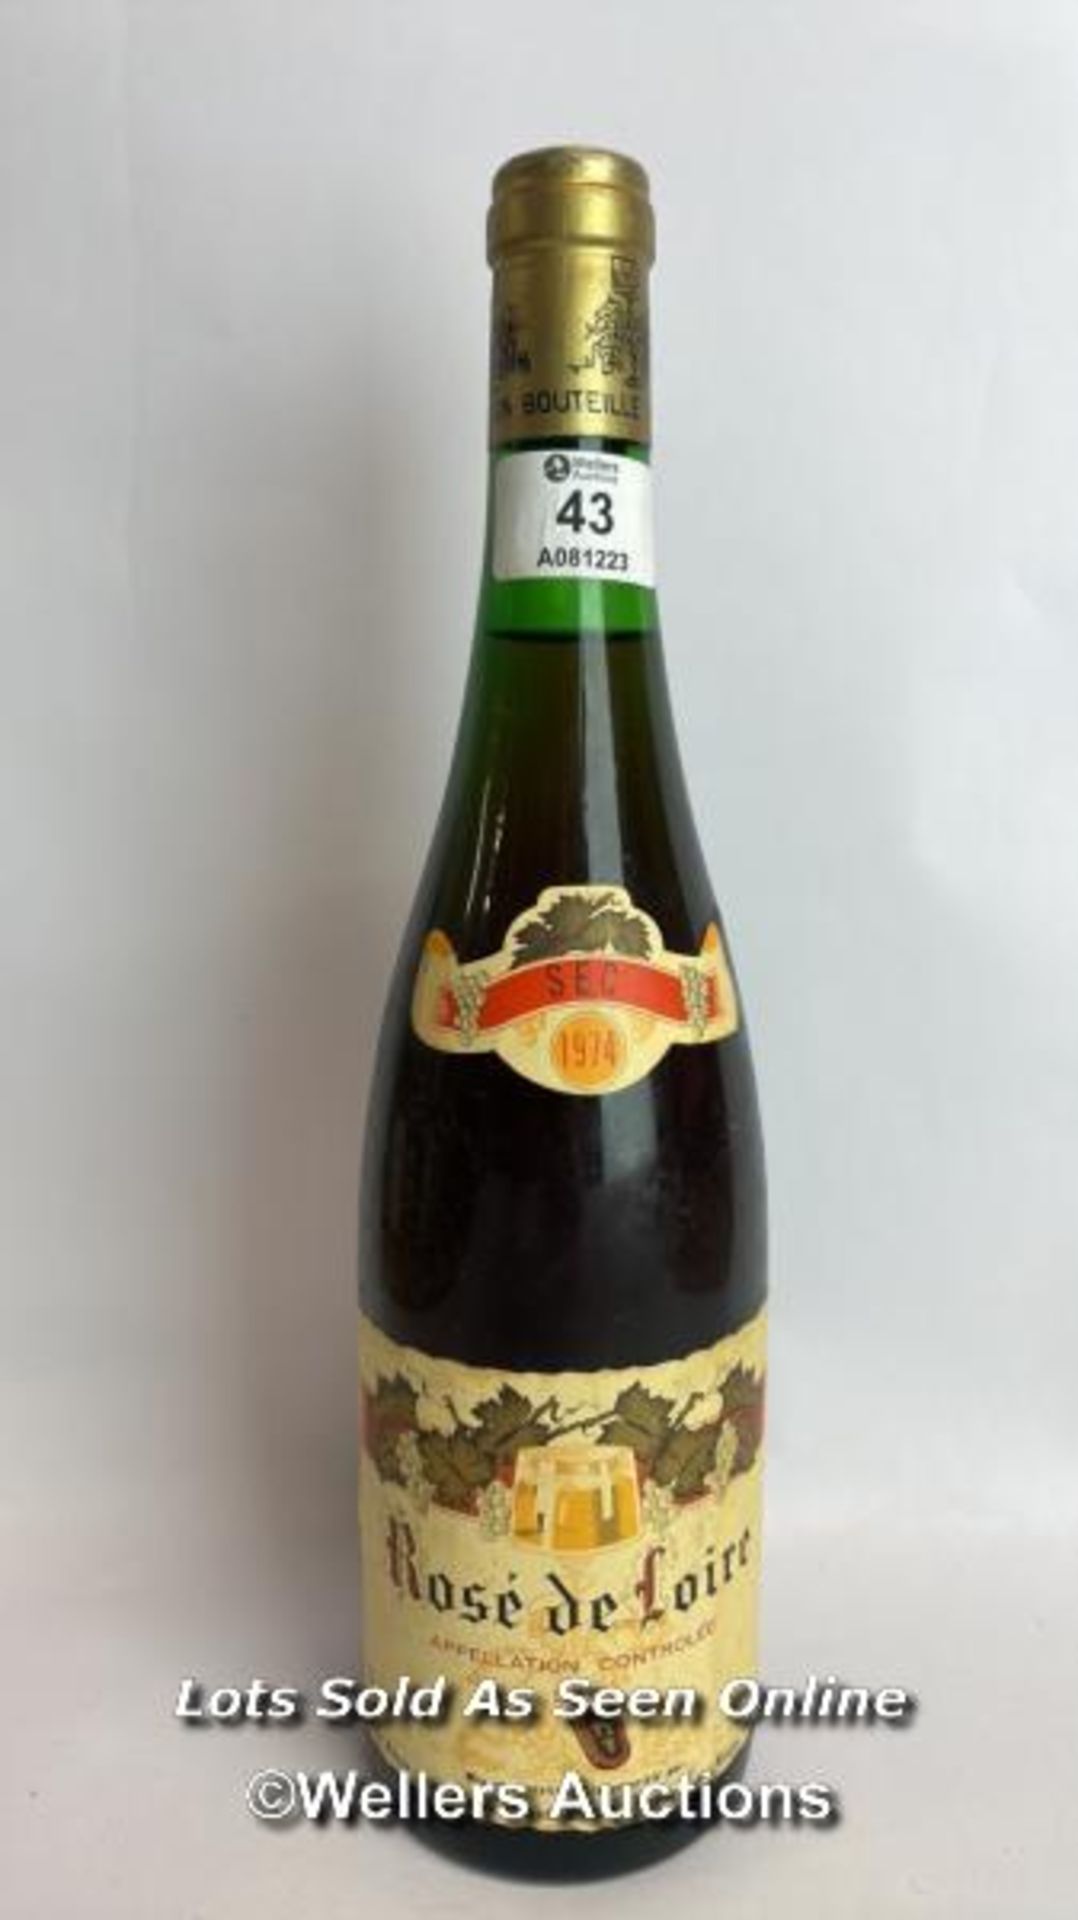 1974 Rose De Loire, 73cl, No vol indicated / Please see images for fill level and general condition.